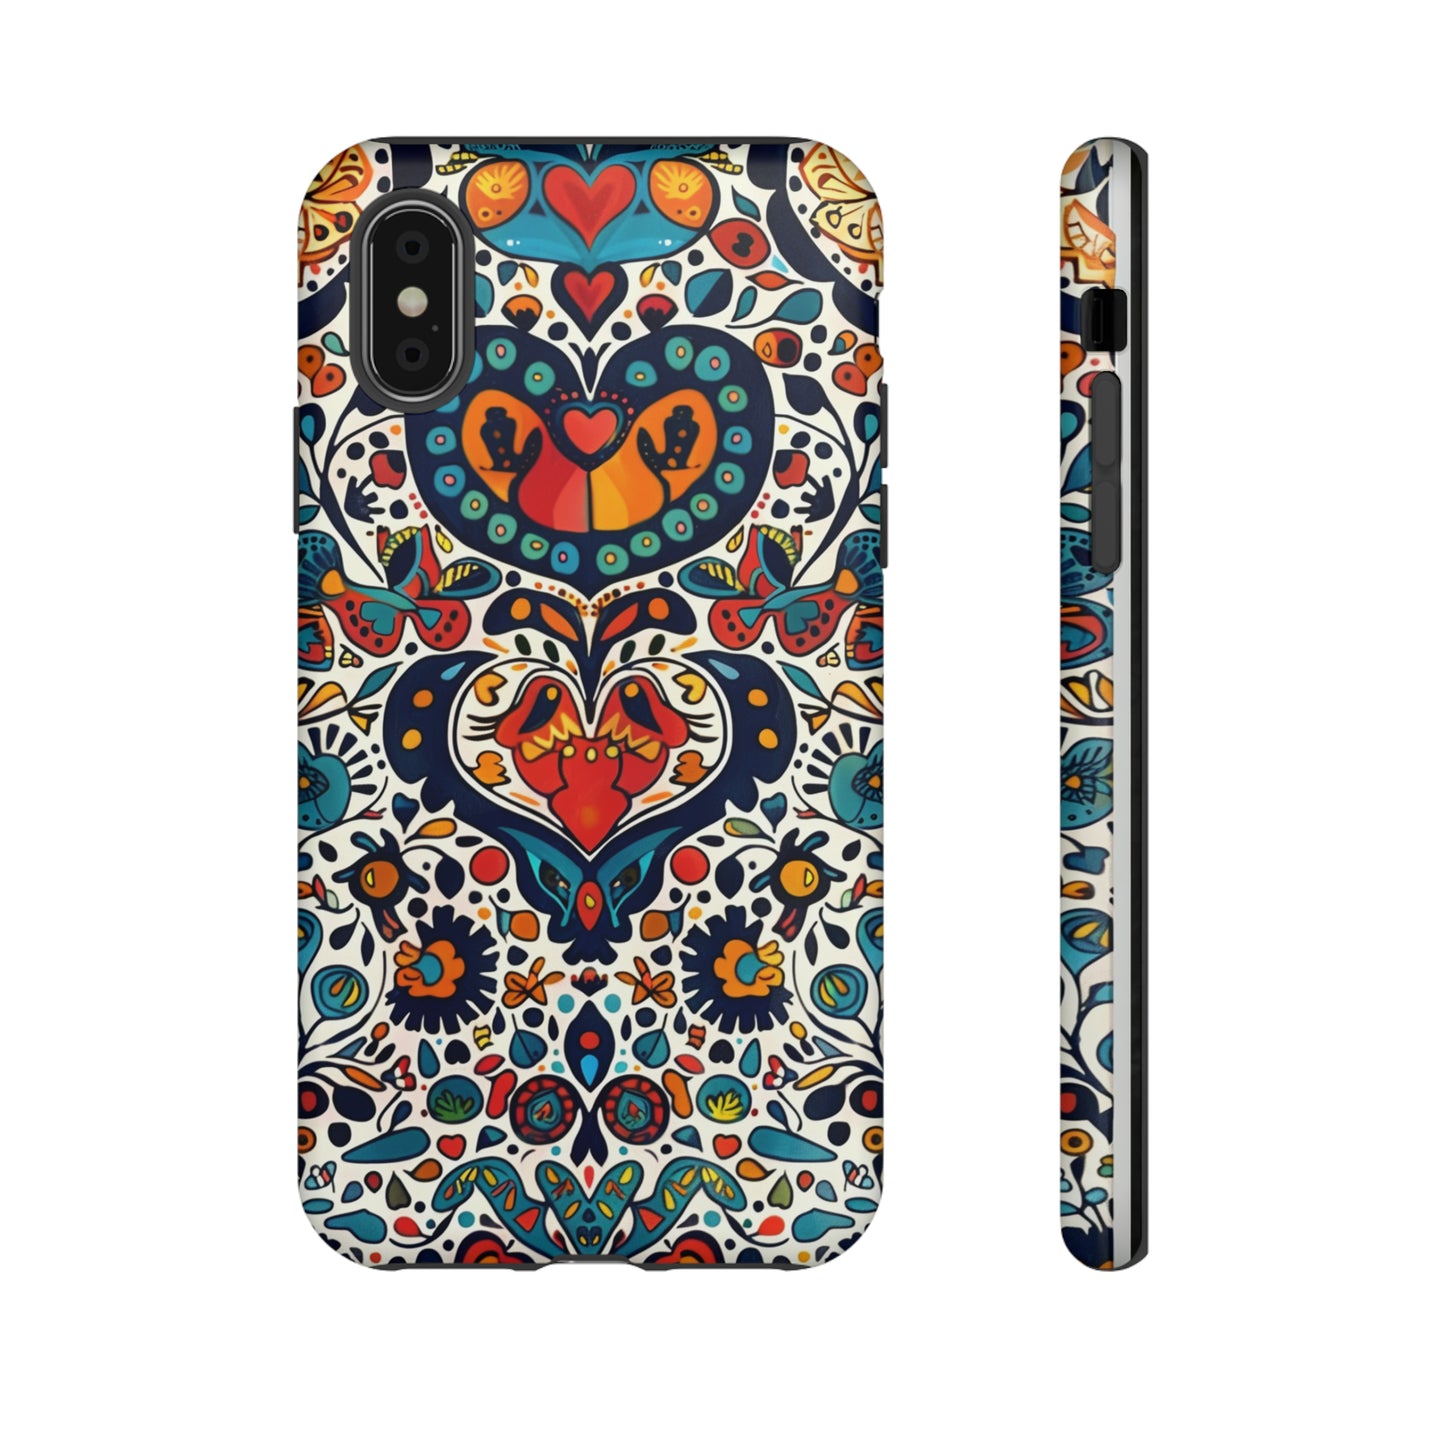 Mural Painting Inspired Case for Google Pixel